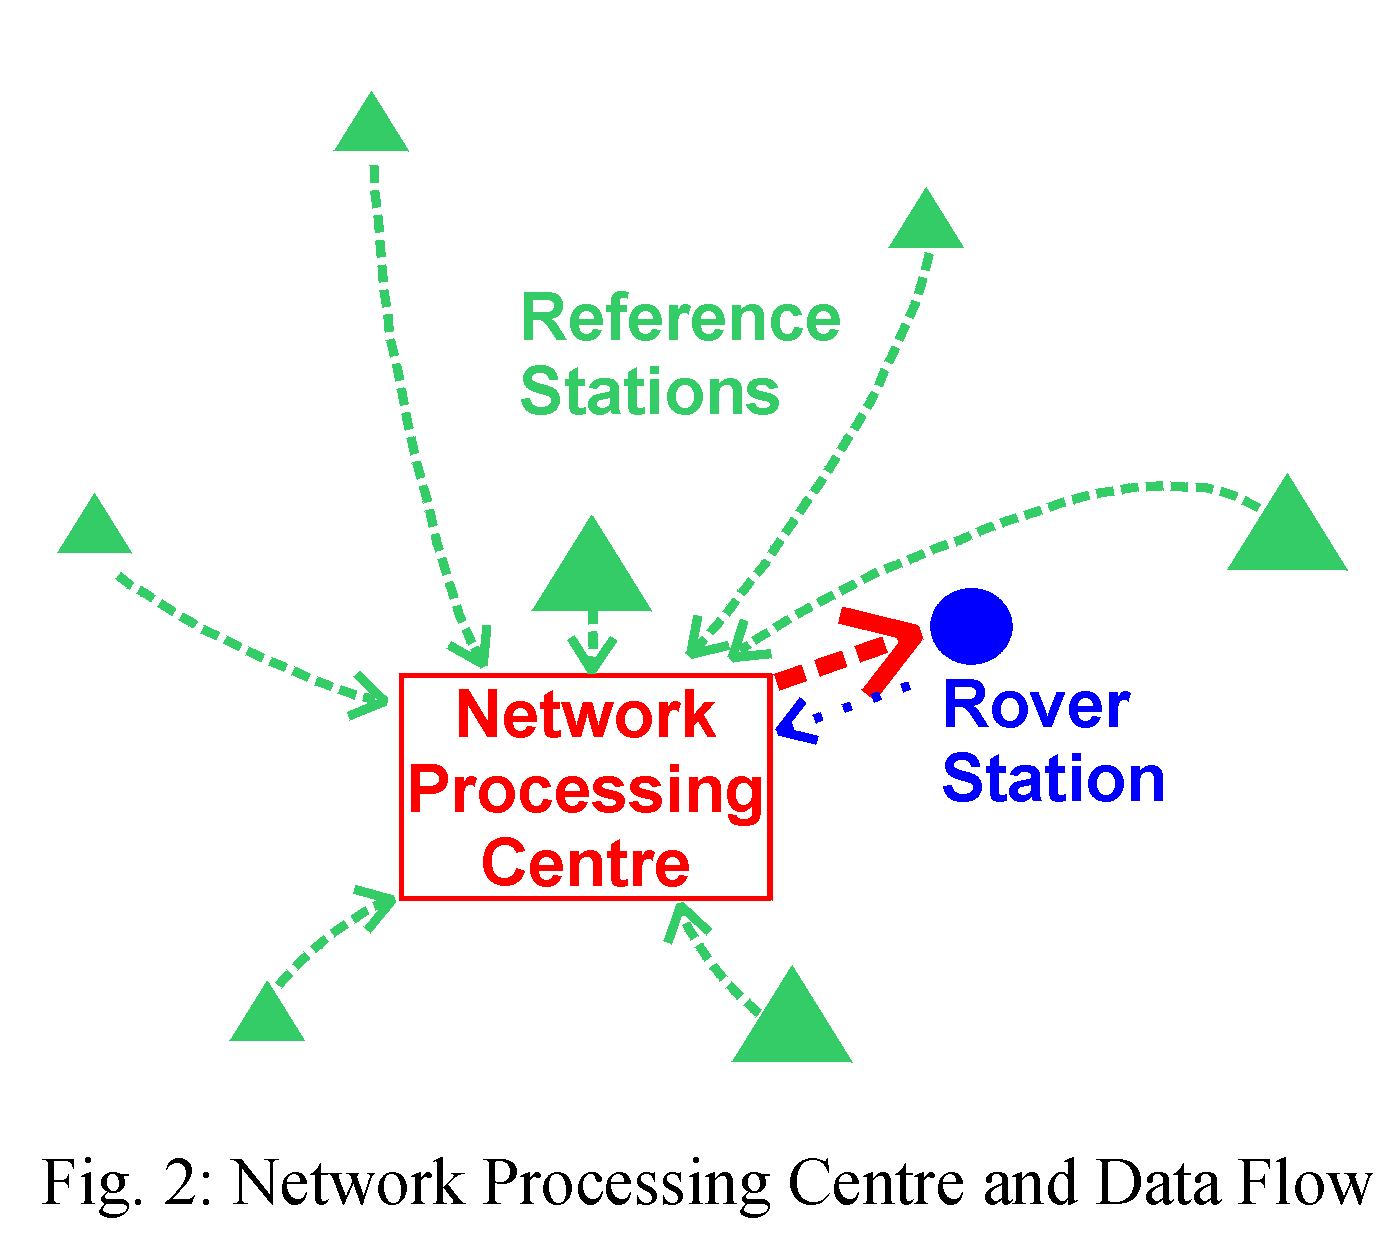 Fig. 2: Network Procesing Centre and Data Flow